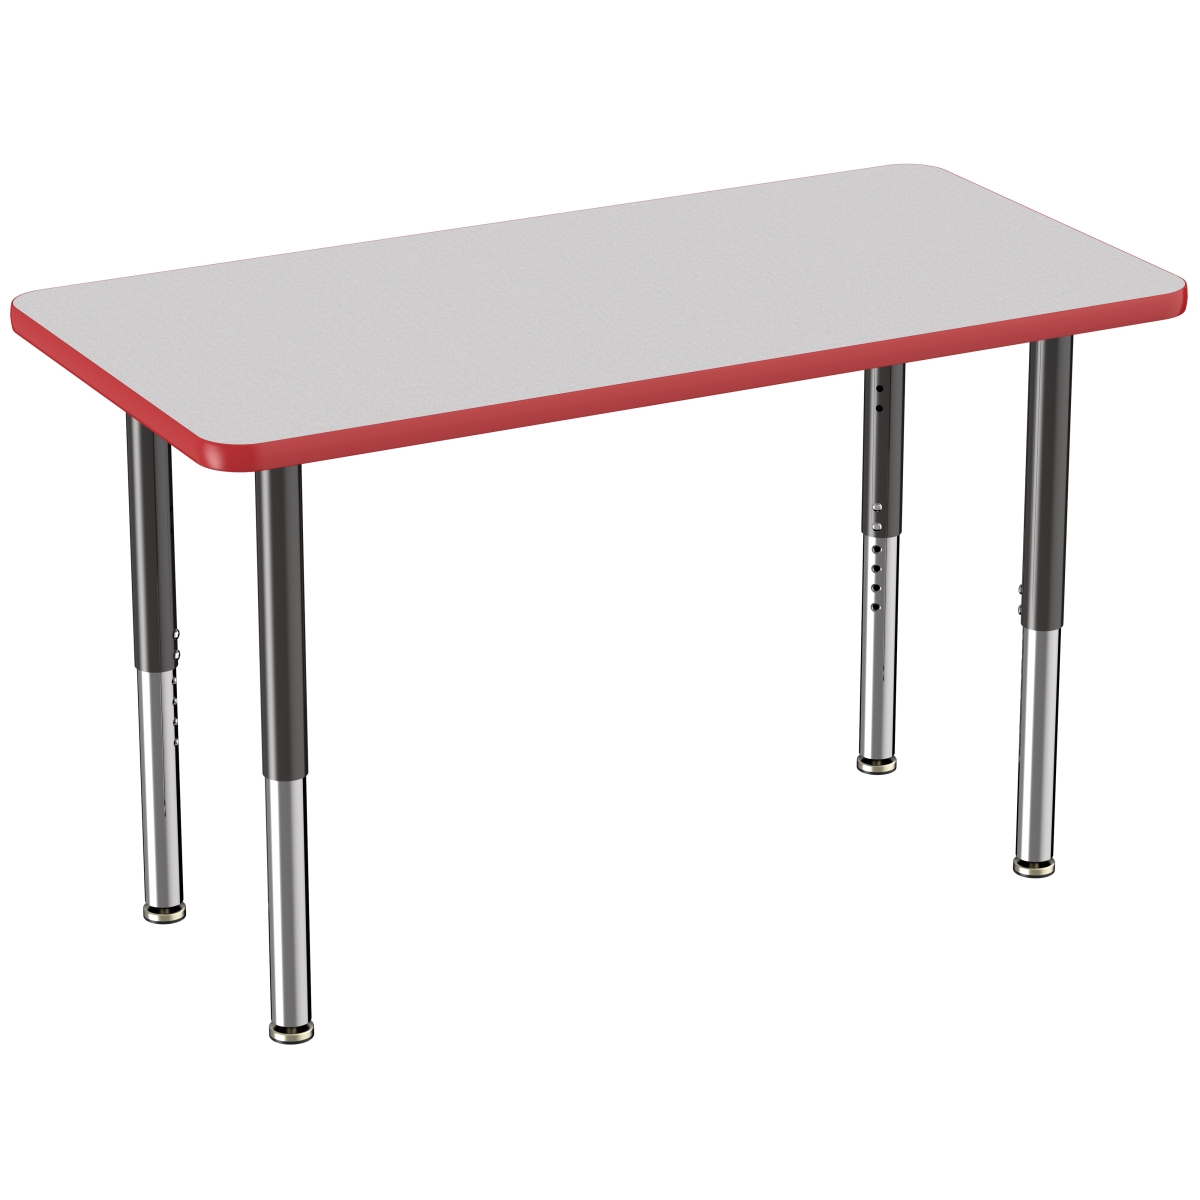 10010-gyrd 24 X 48 In. Rectangle T-mold Adjustable Activity Table With Super Leg - Grey & Red